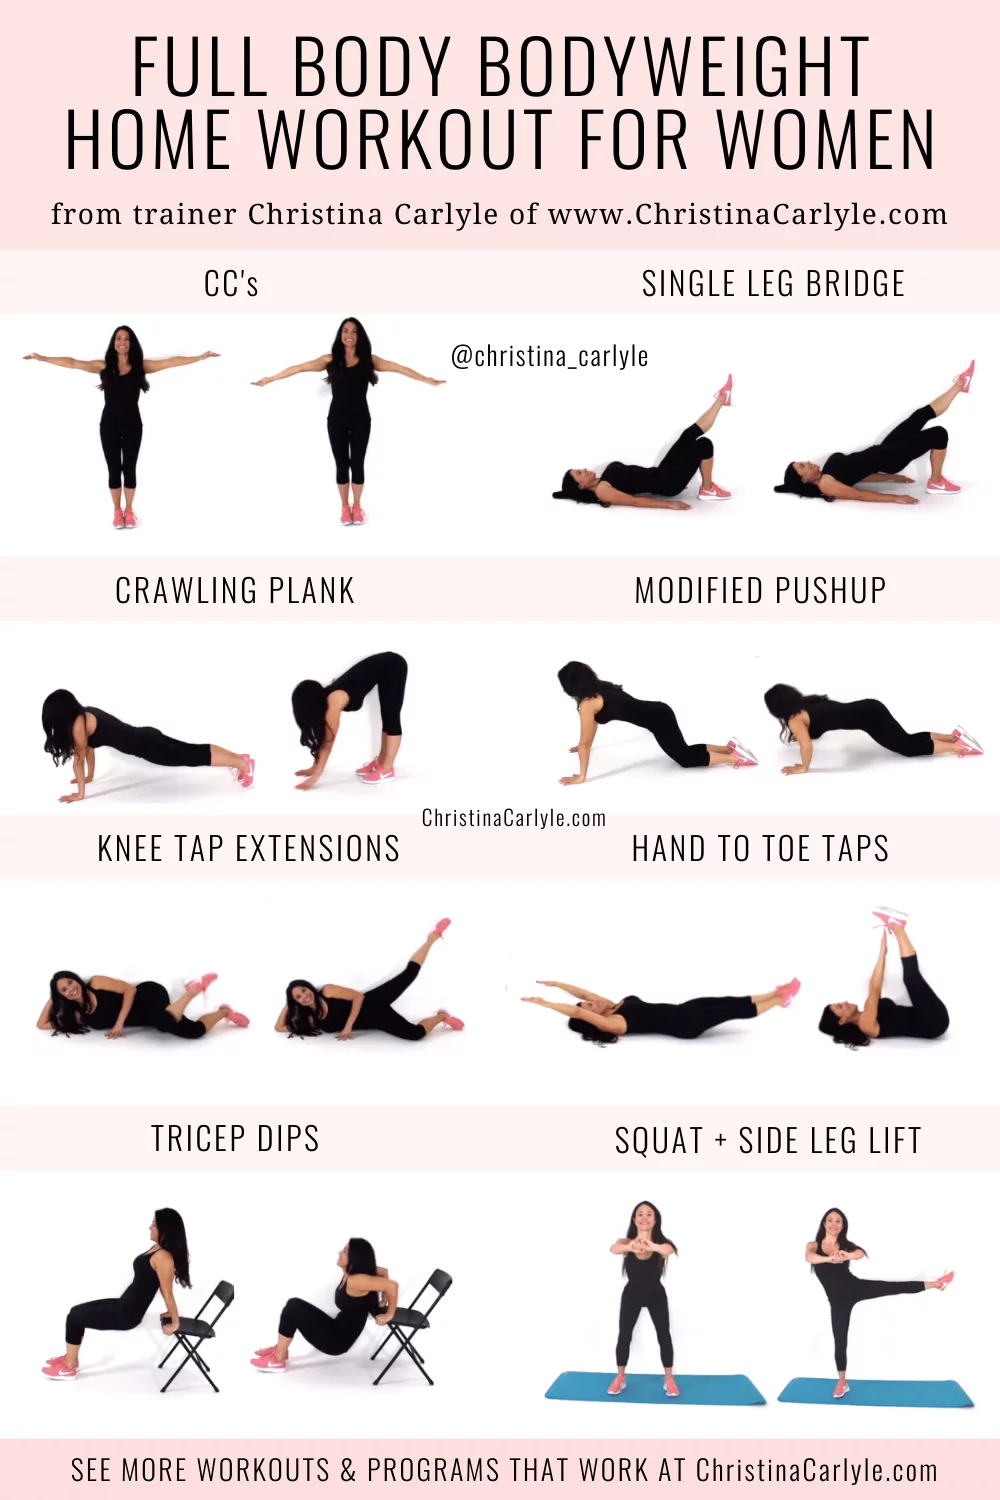 Full body bodyweight workout with 8 bodyweight exercises being done by Christina Carlyle